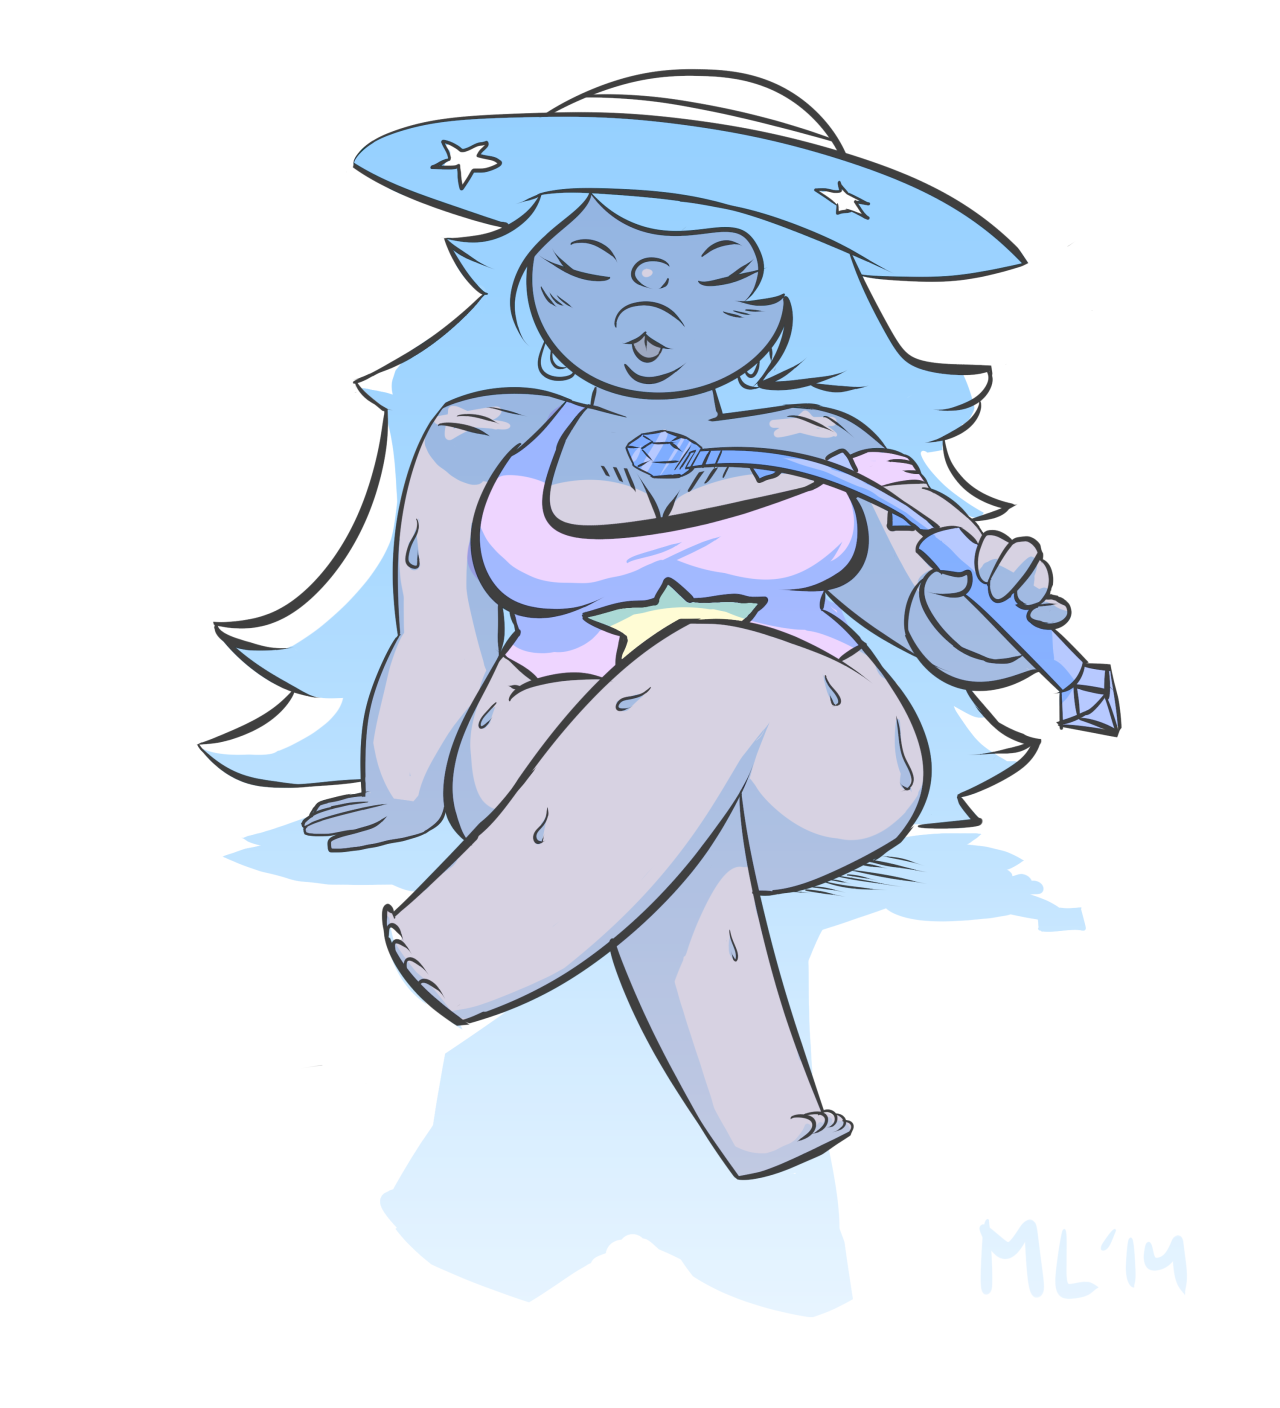 mikerlantz:  Finished my swimsuit Amethyst, with some alternate colors just for fun!I